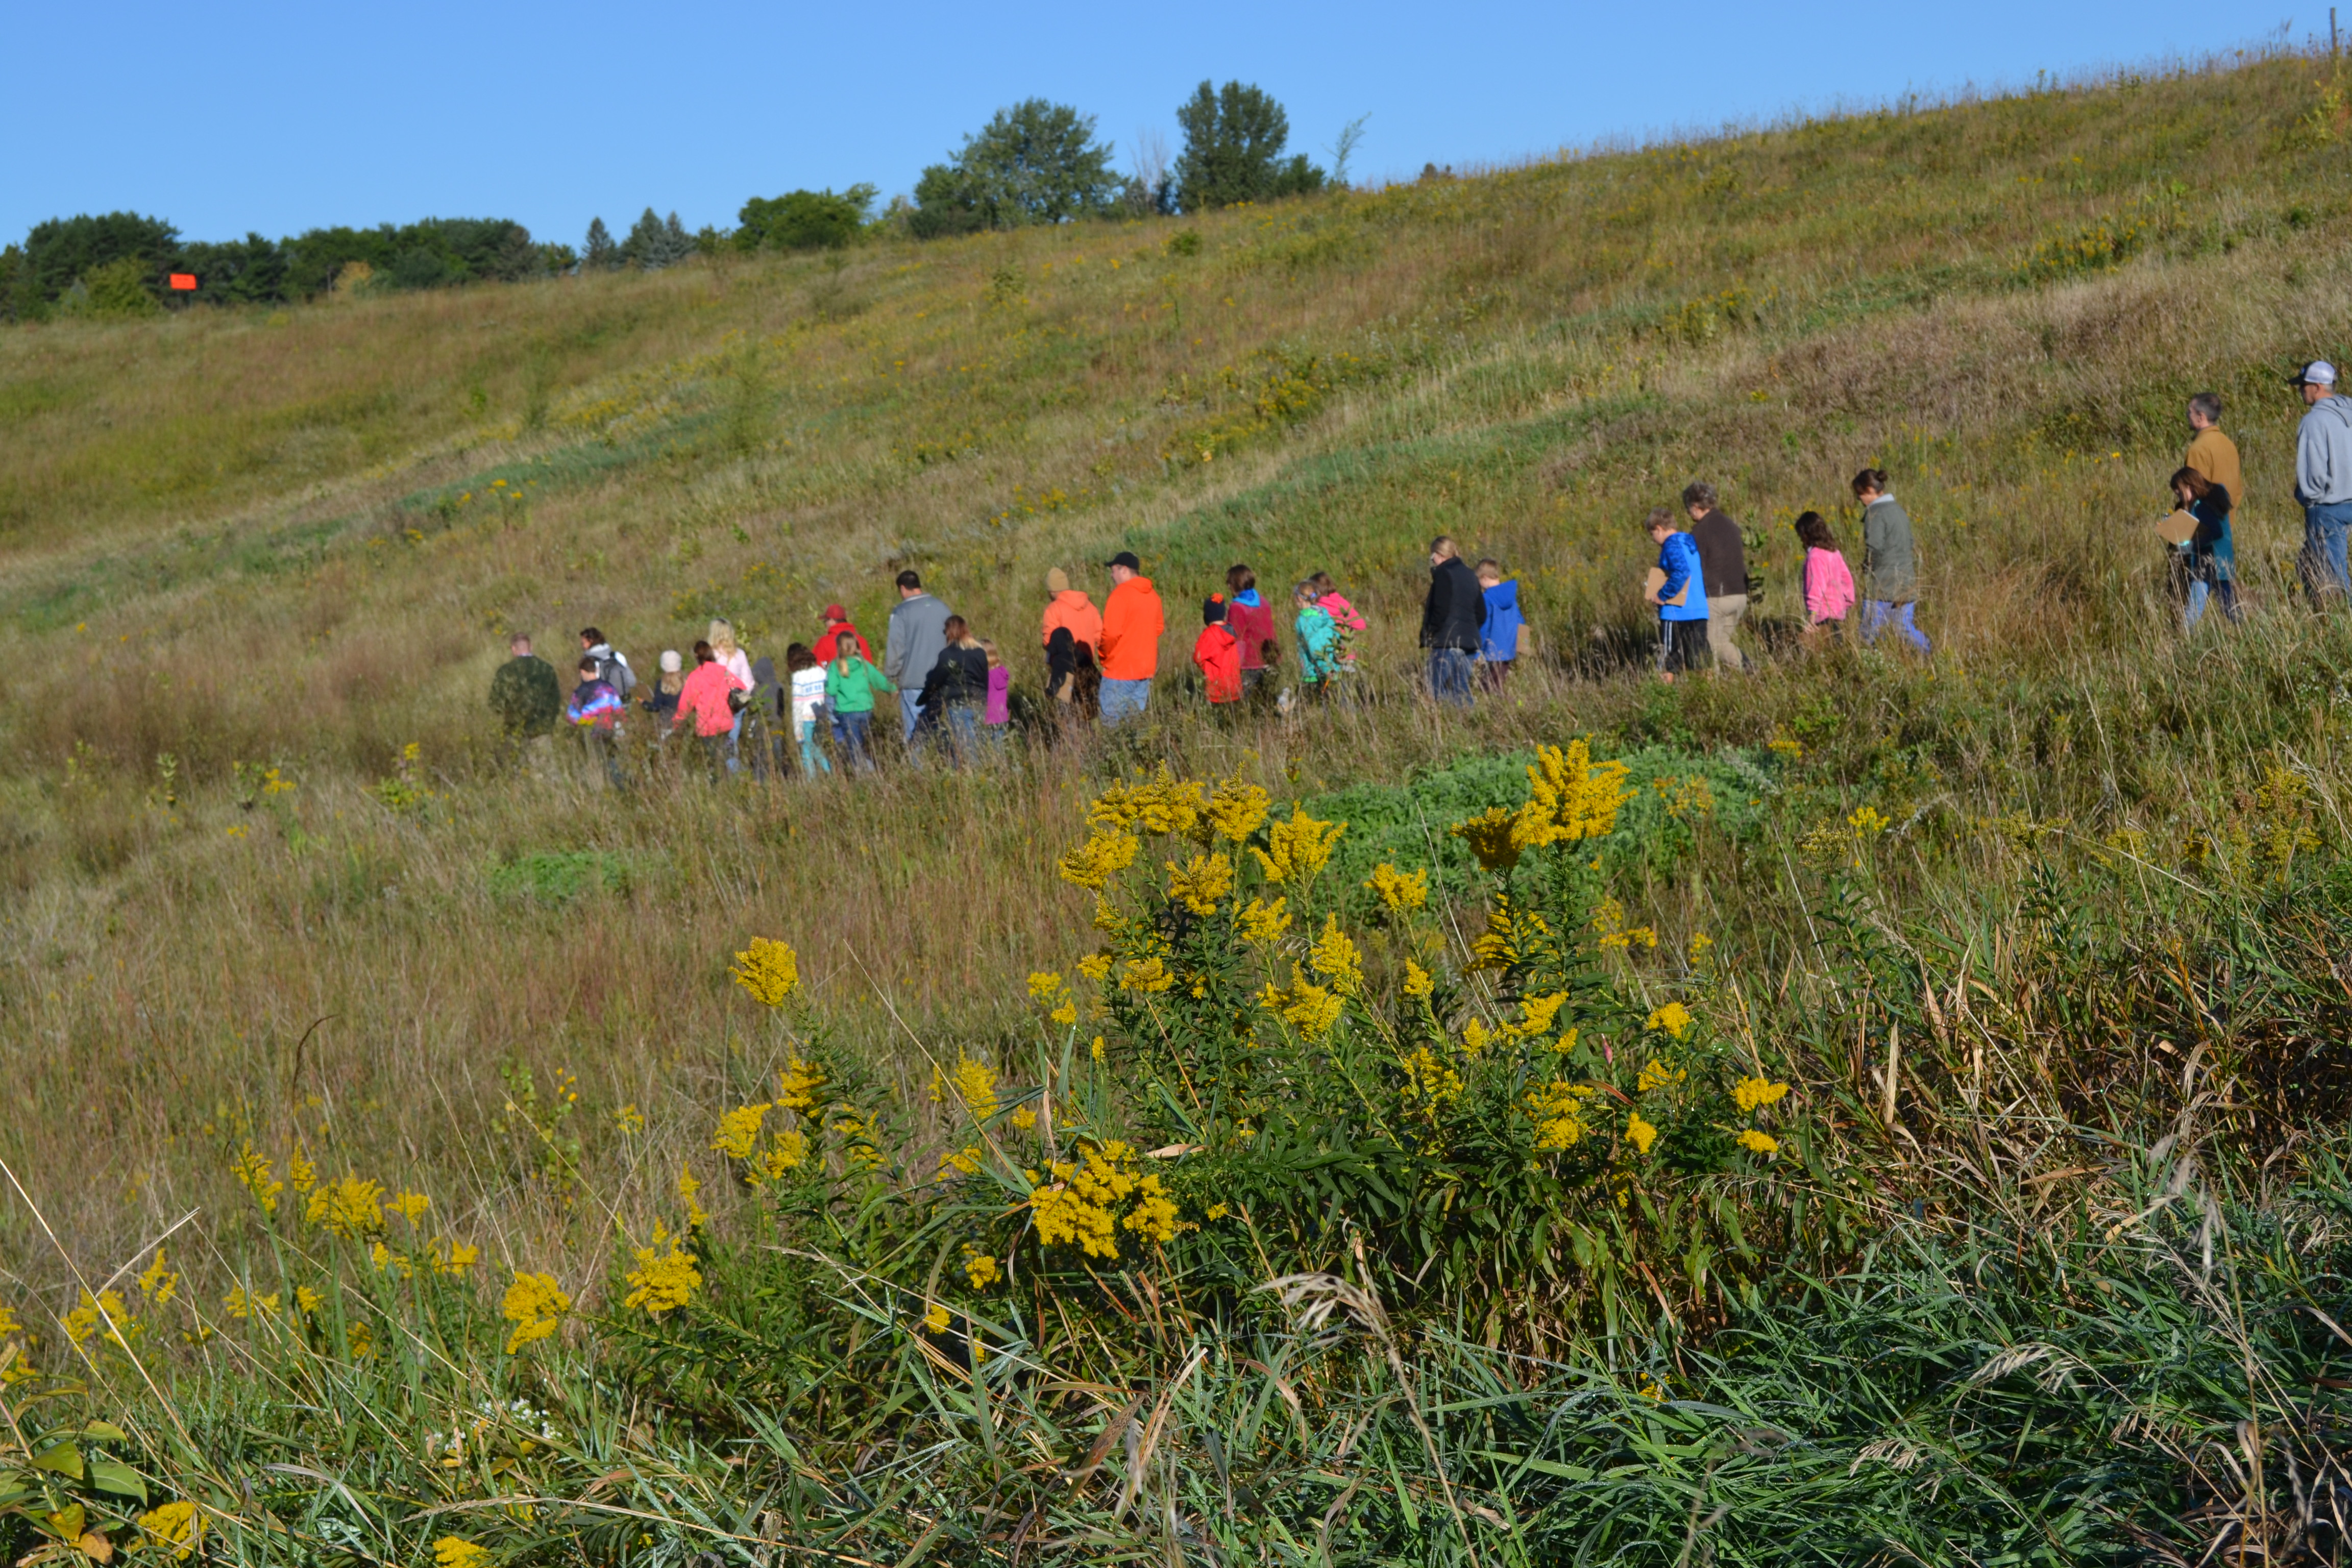 About 2 dozen children and adults walk through the prairie on the Wetland Way Trail in late summer